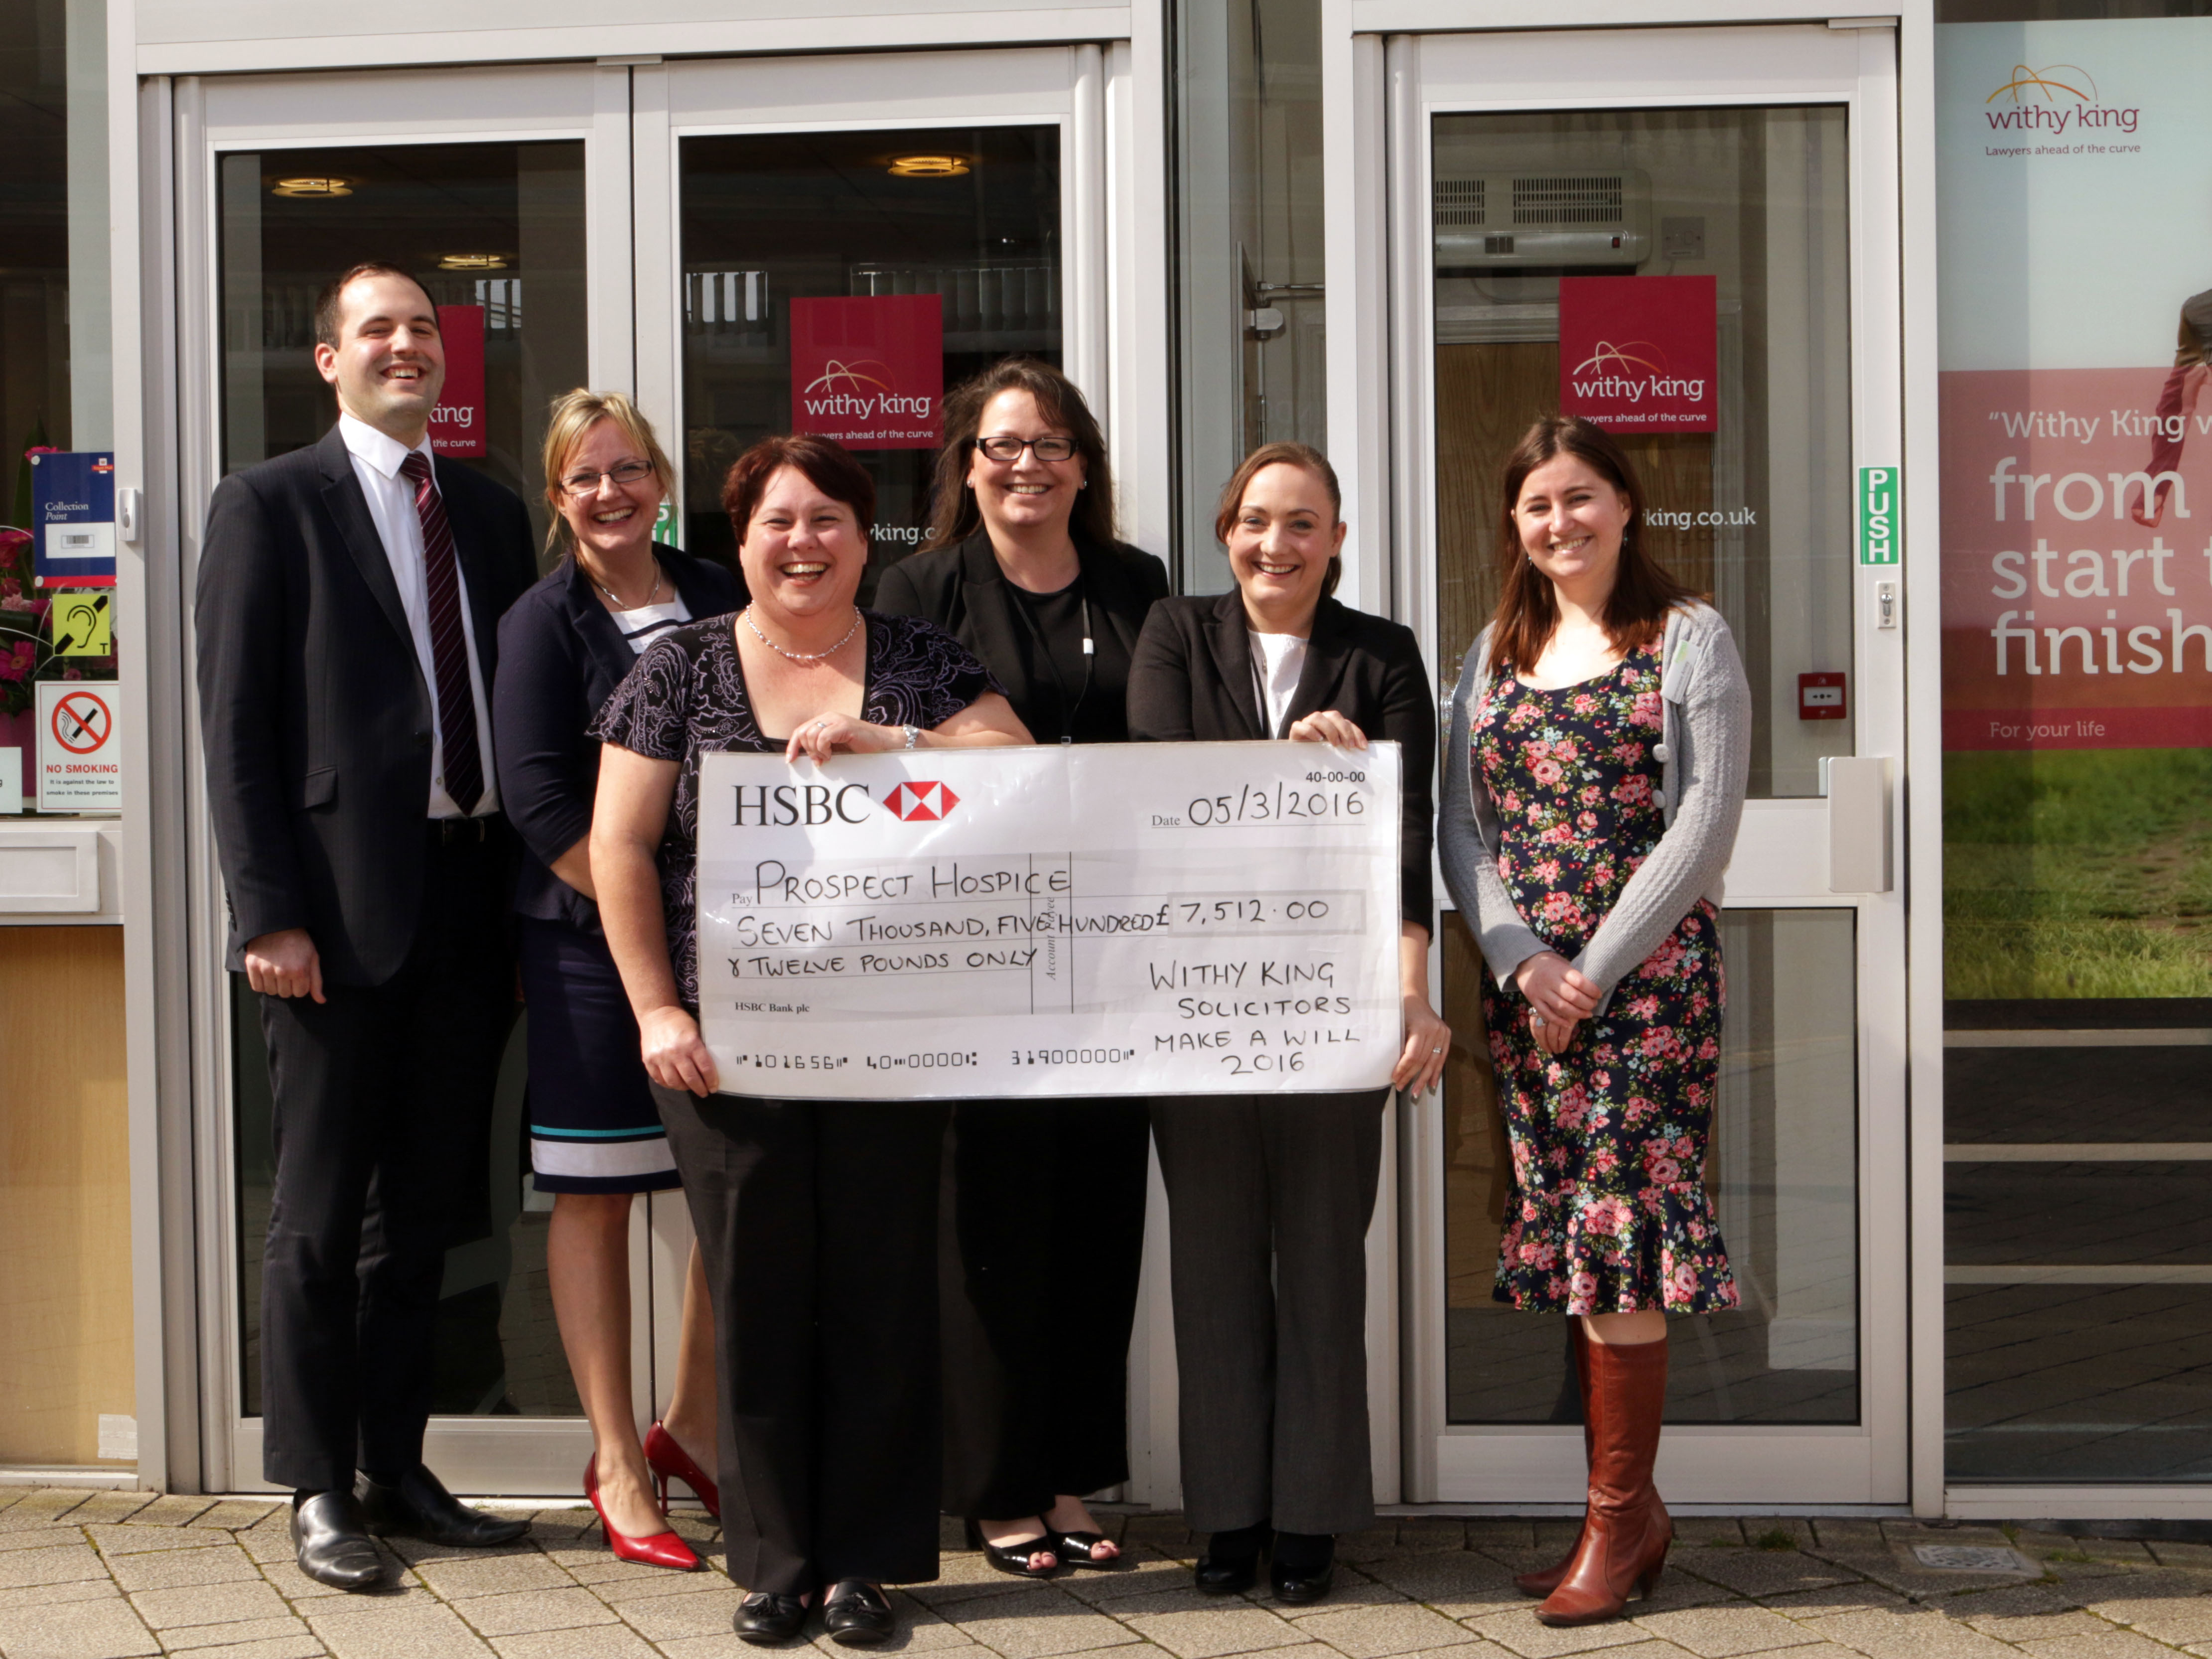 Prospect Hospice benefits to tune of £7,500 from Withy King’s support for Make A Will Month